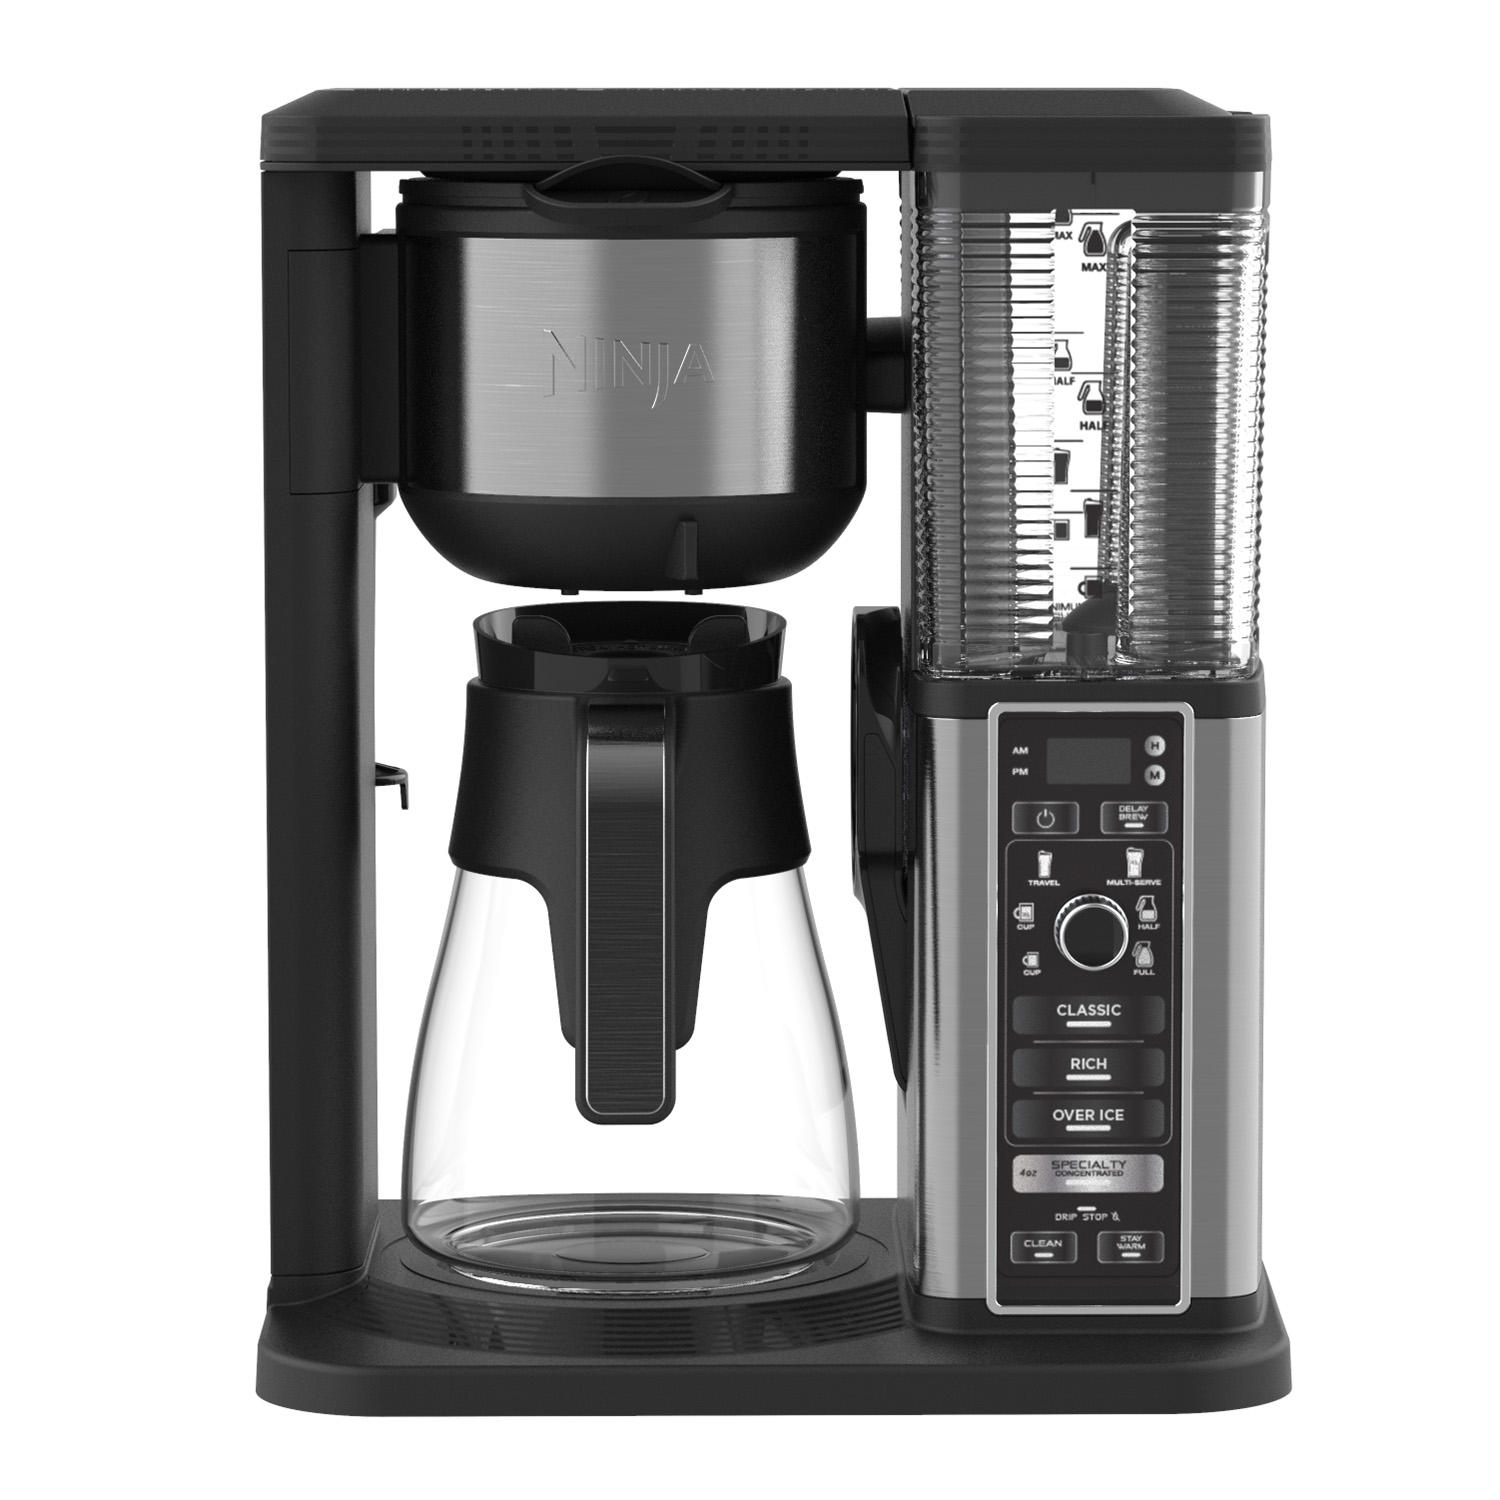 Ninja Specialty Coffee Maker with Fold-Away Frother and Glass Carafe